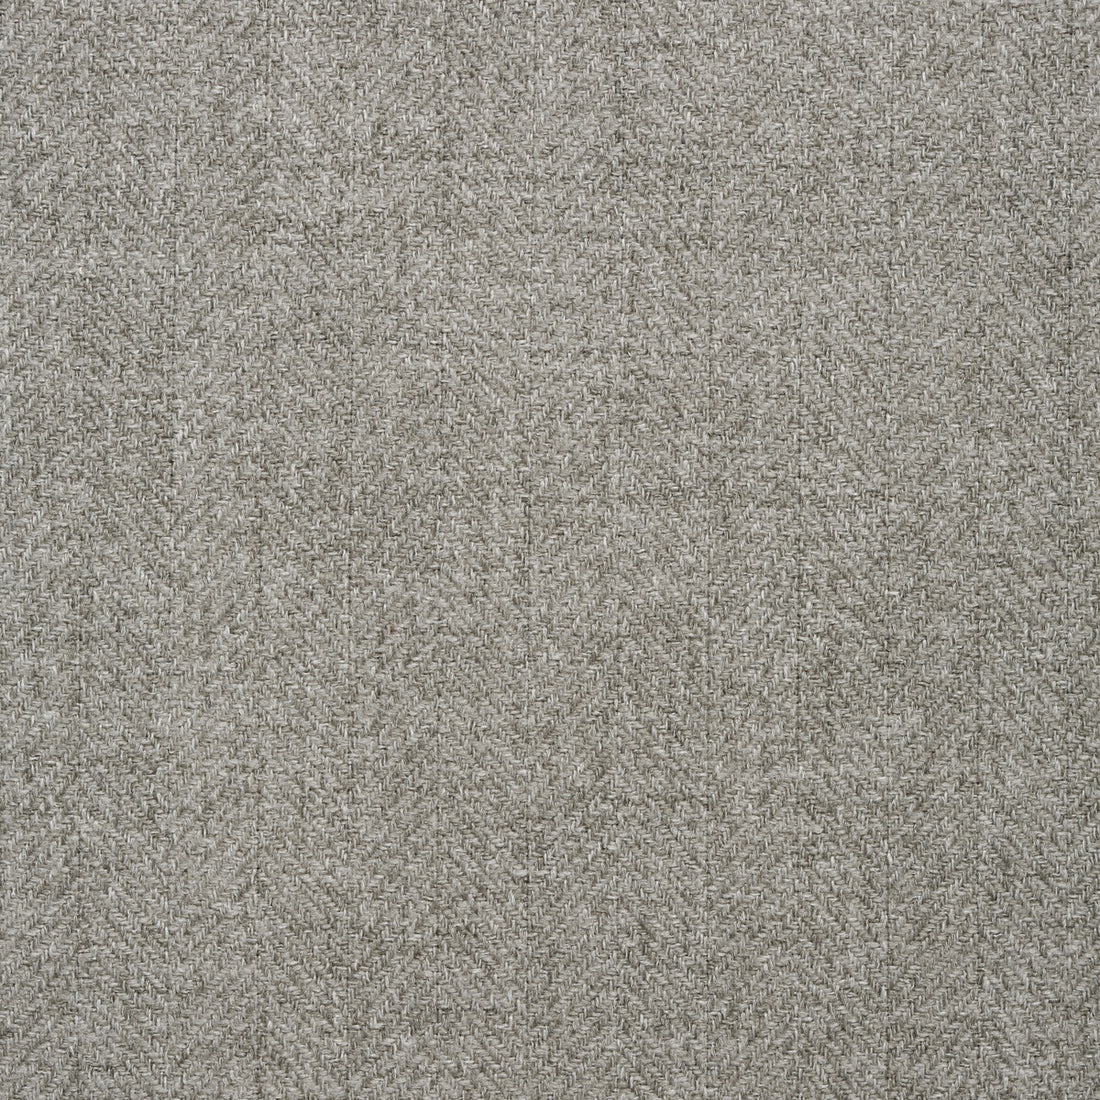 Kravet Smart fabric in 35119-11 color - pattern 35119.11.0 - by Kravet Smart in the Performance Crypton Home collection